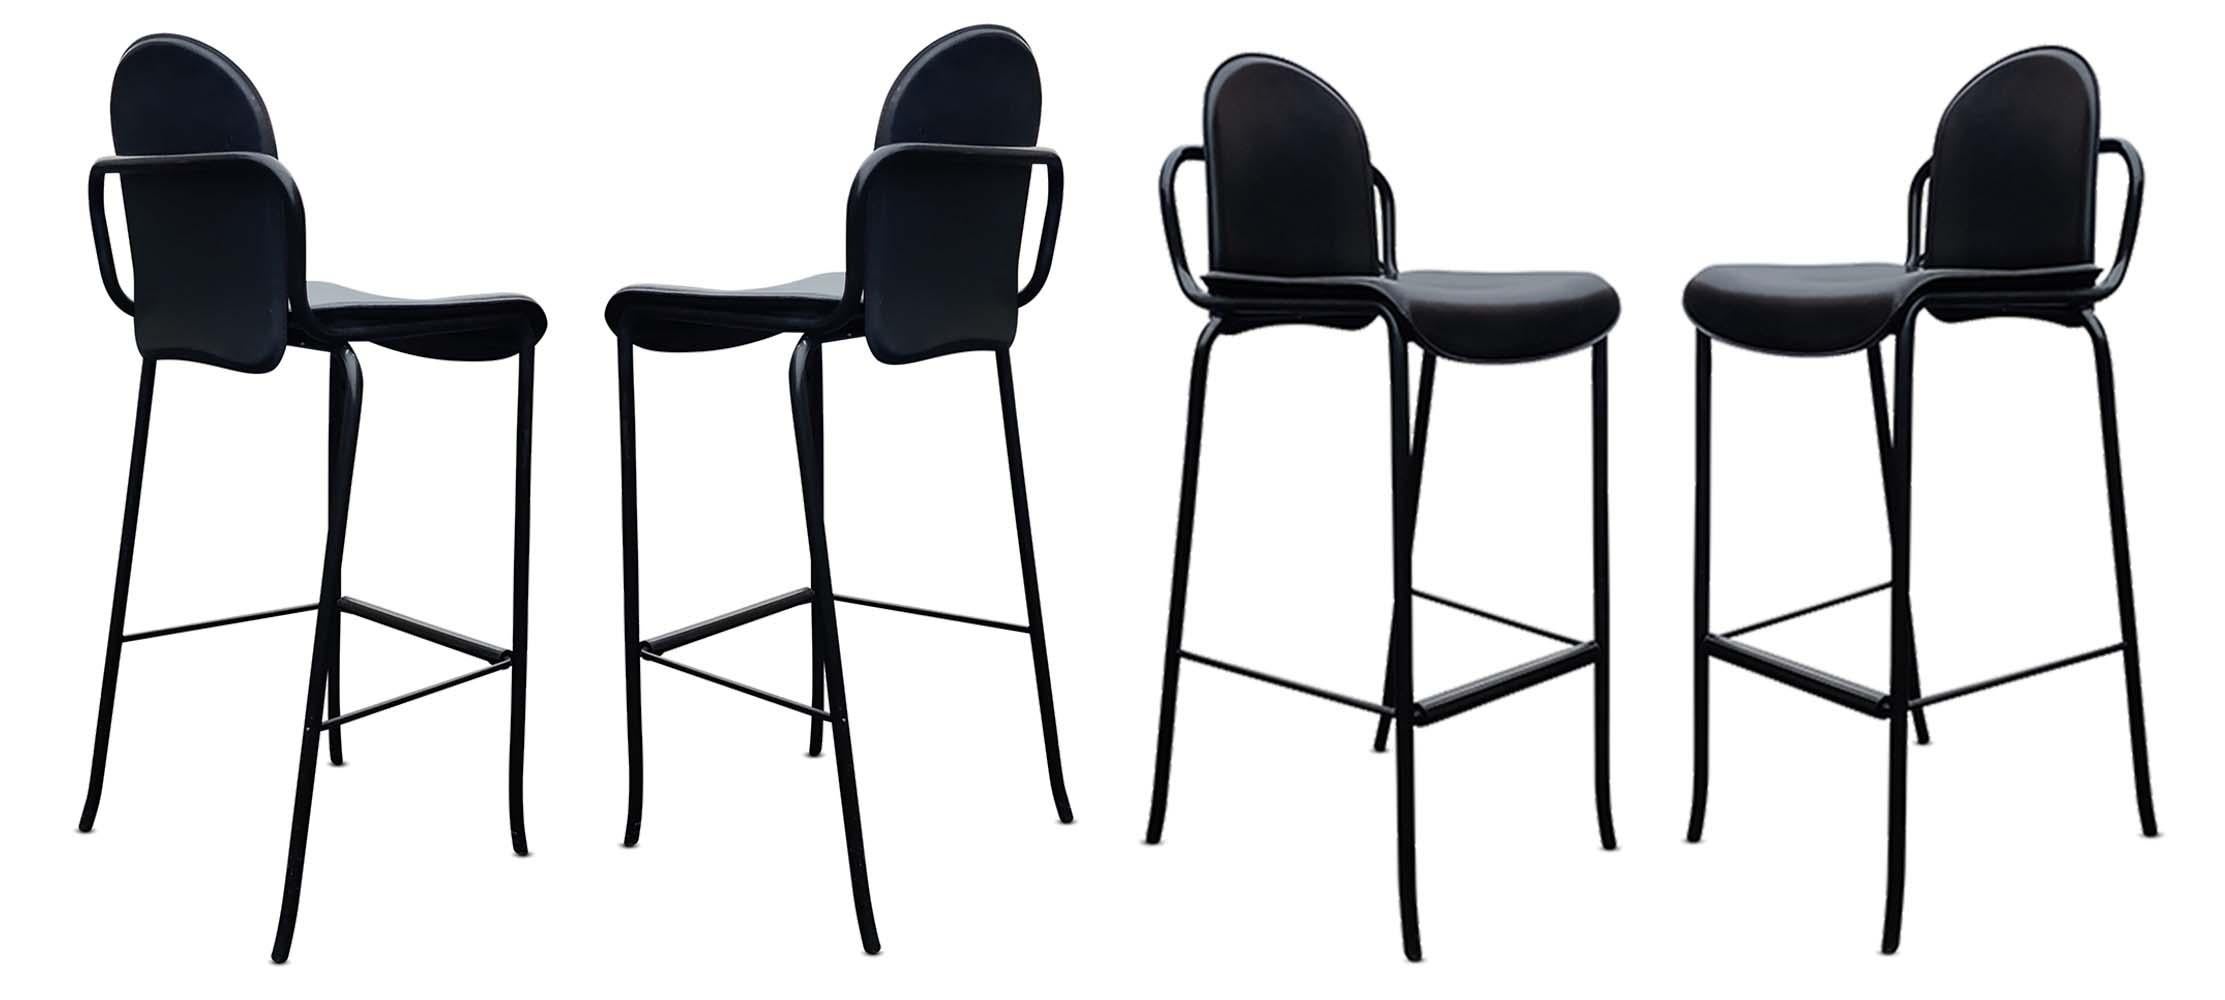 Three stitched leather, slim profile side, stools or barstools in the style of legendary designer Willy Rizzo and manufactured by Cidue. Italian made is the late 1970s or early 1980s, high quality, super sleek, sturdy and very comfortable. All have